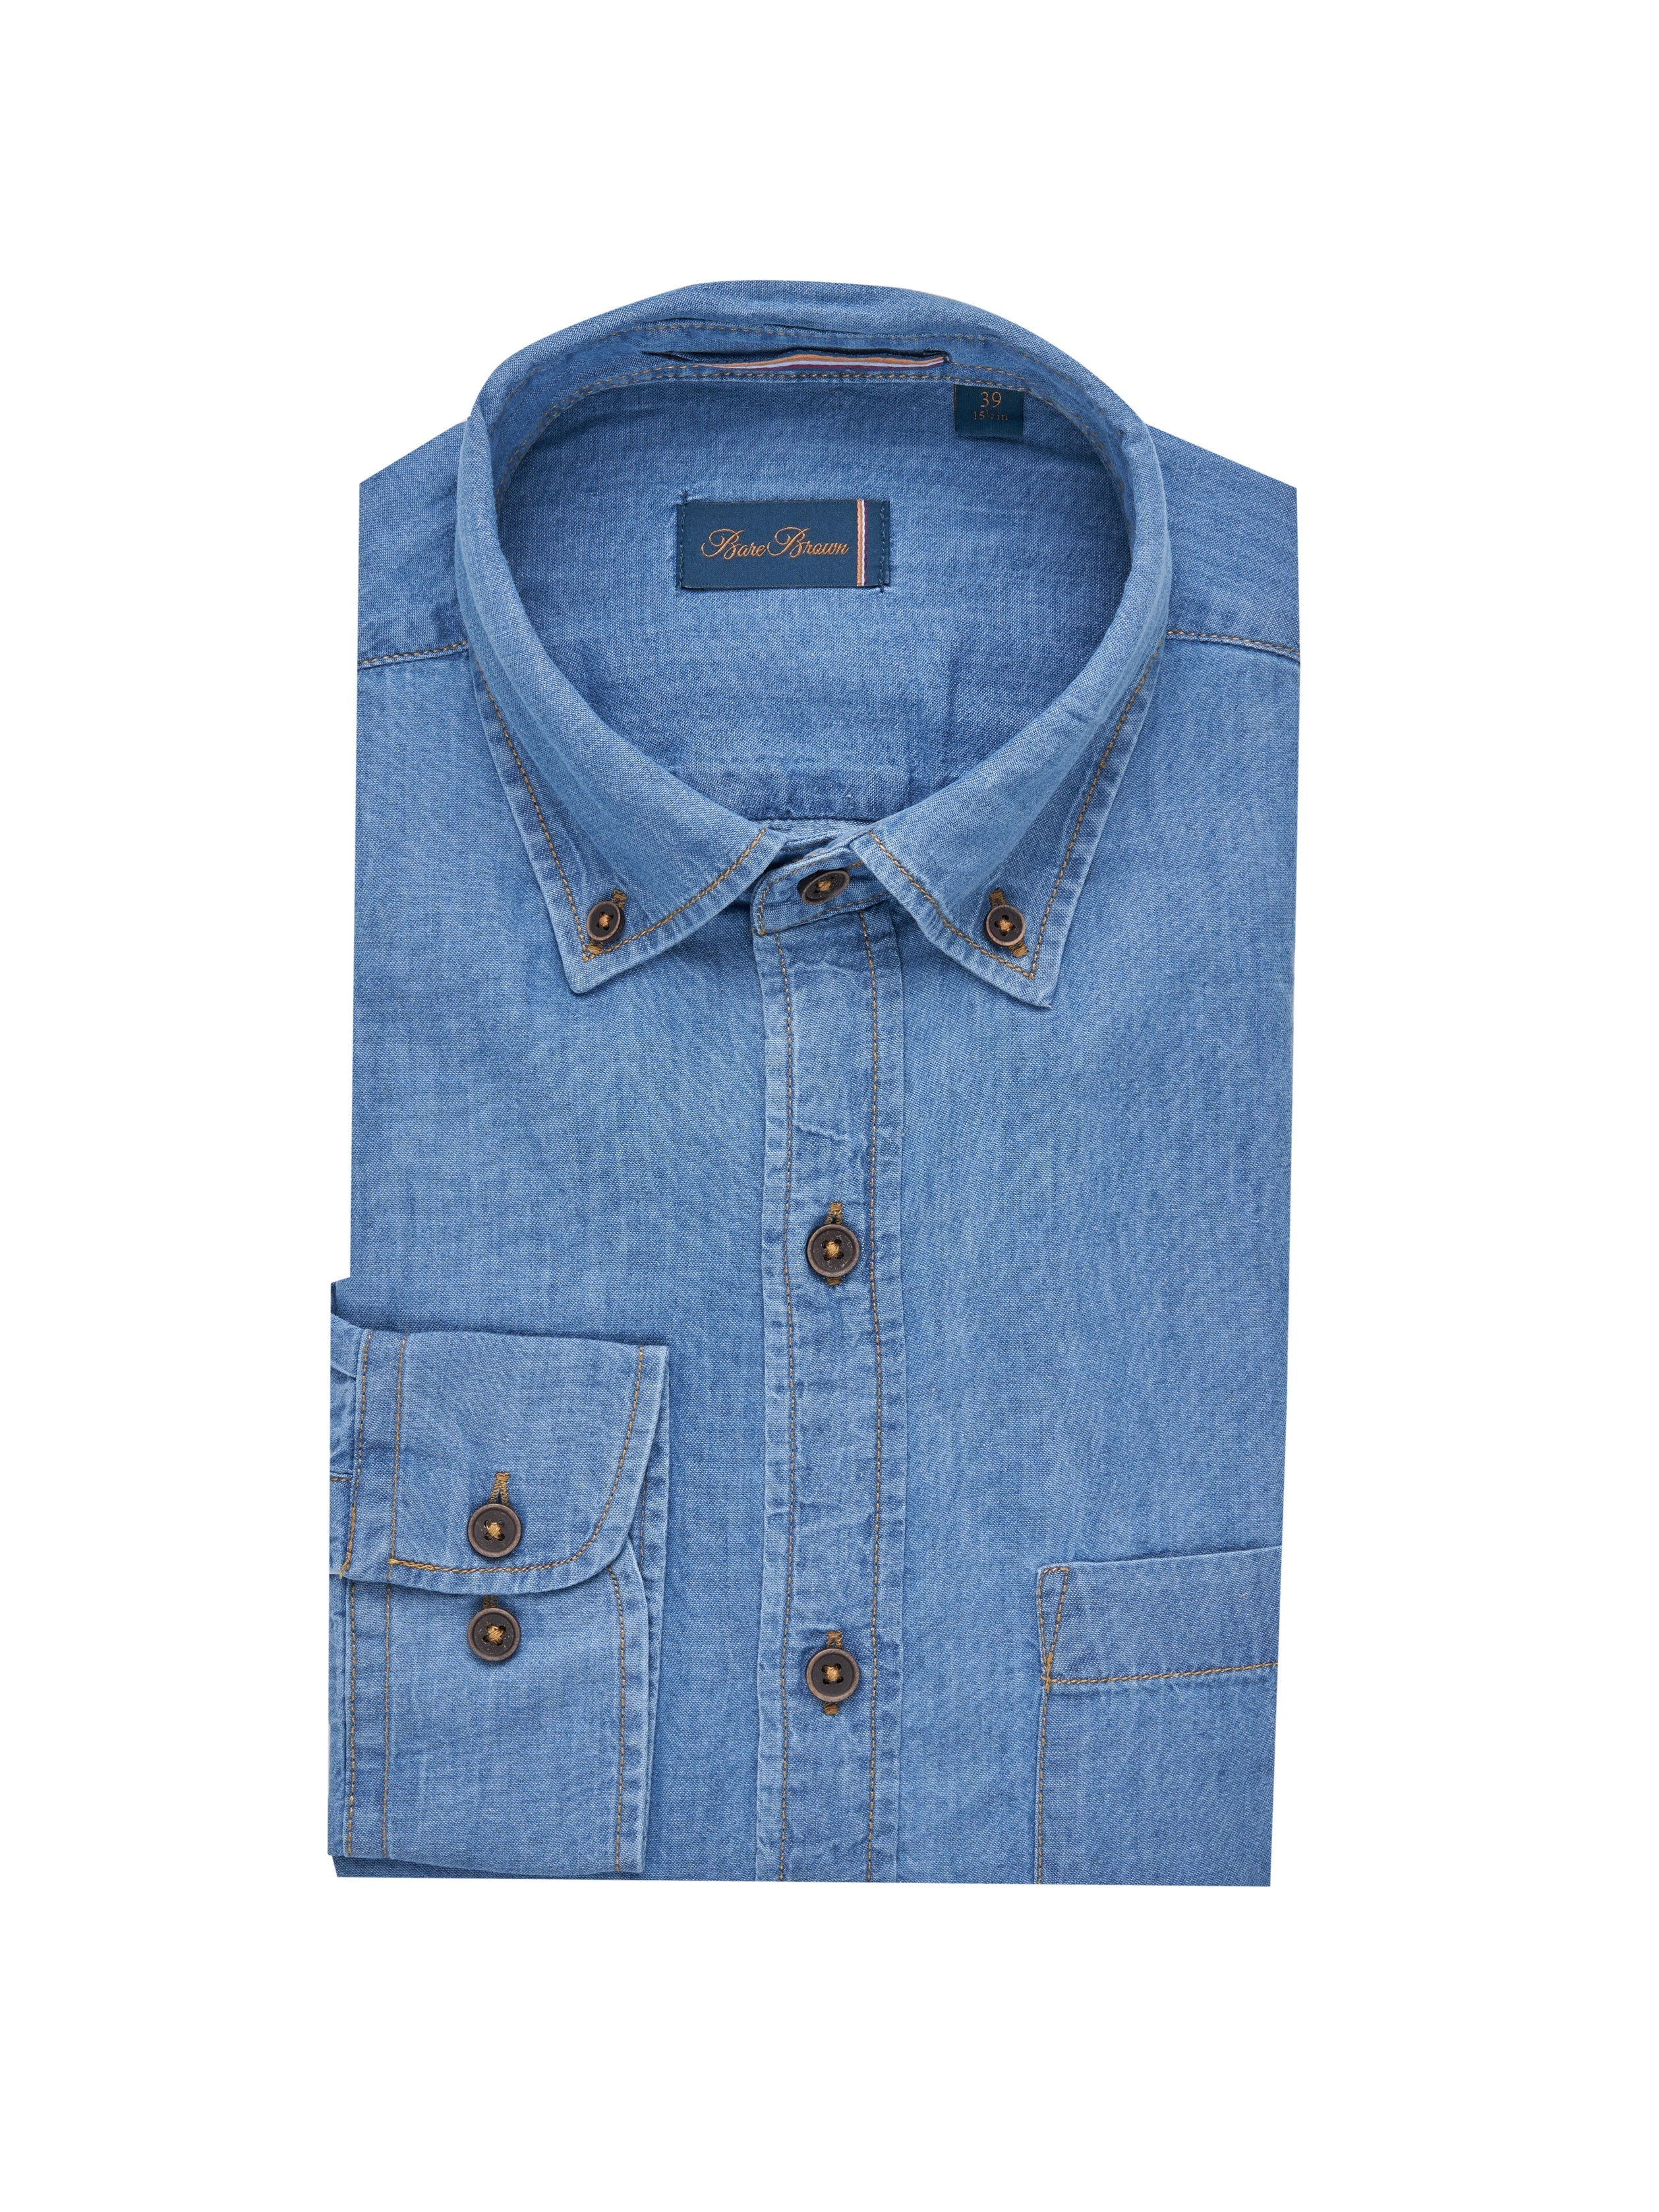 Bare Brown Cotton Denim Shirt, Slim Fit with Full Sleeves - Blue